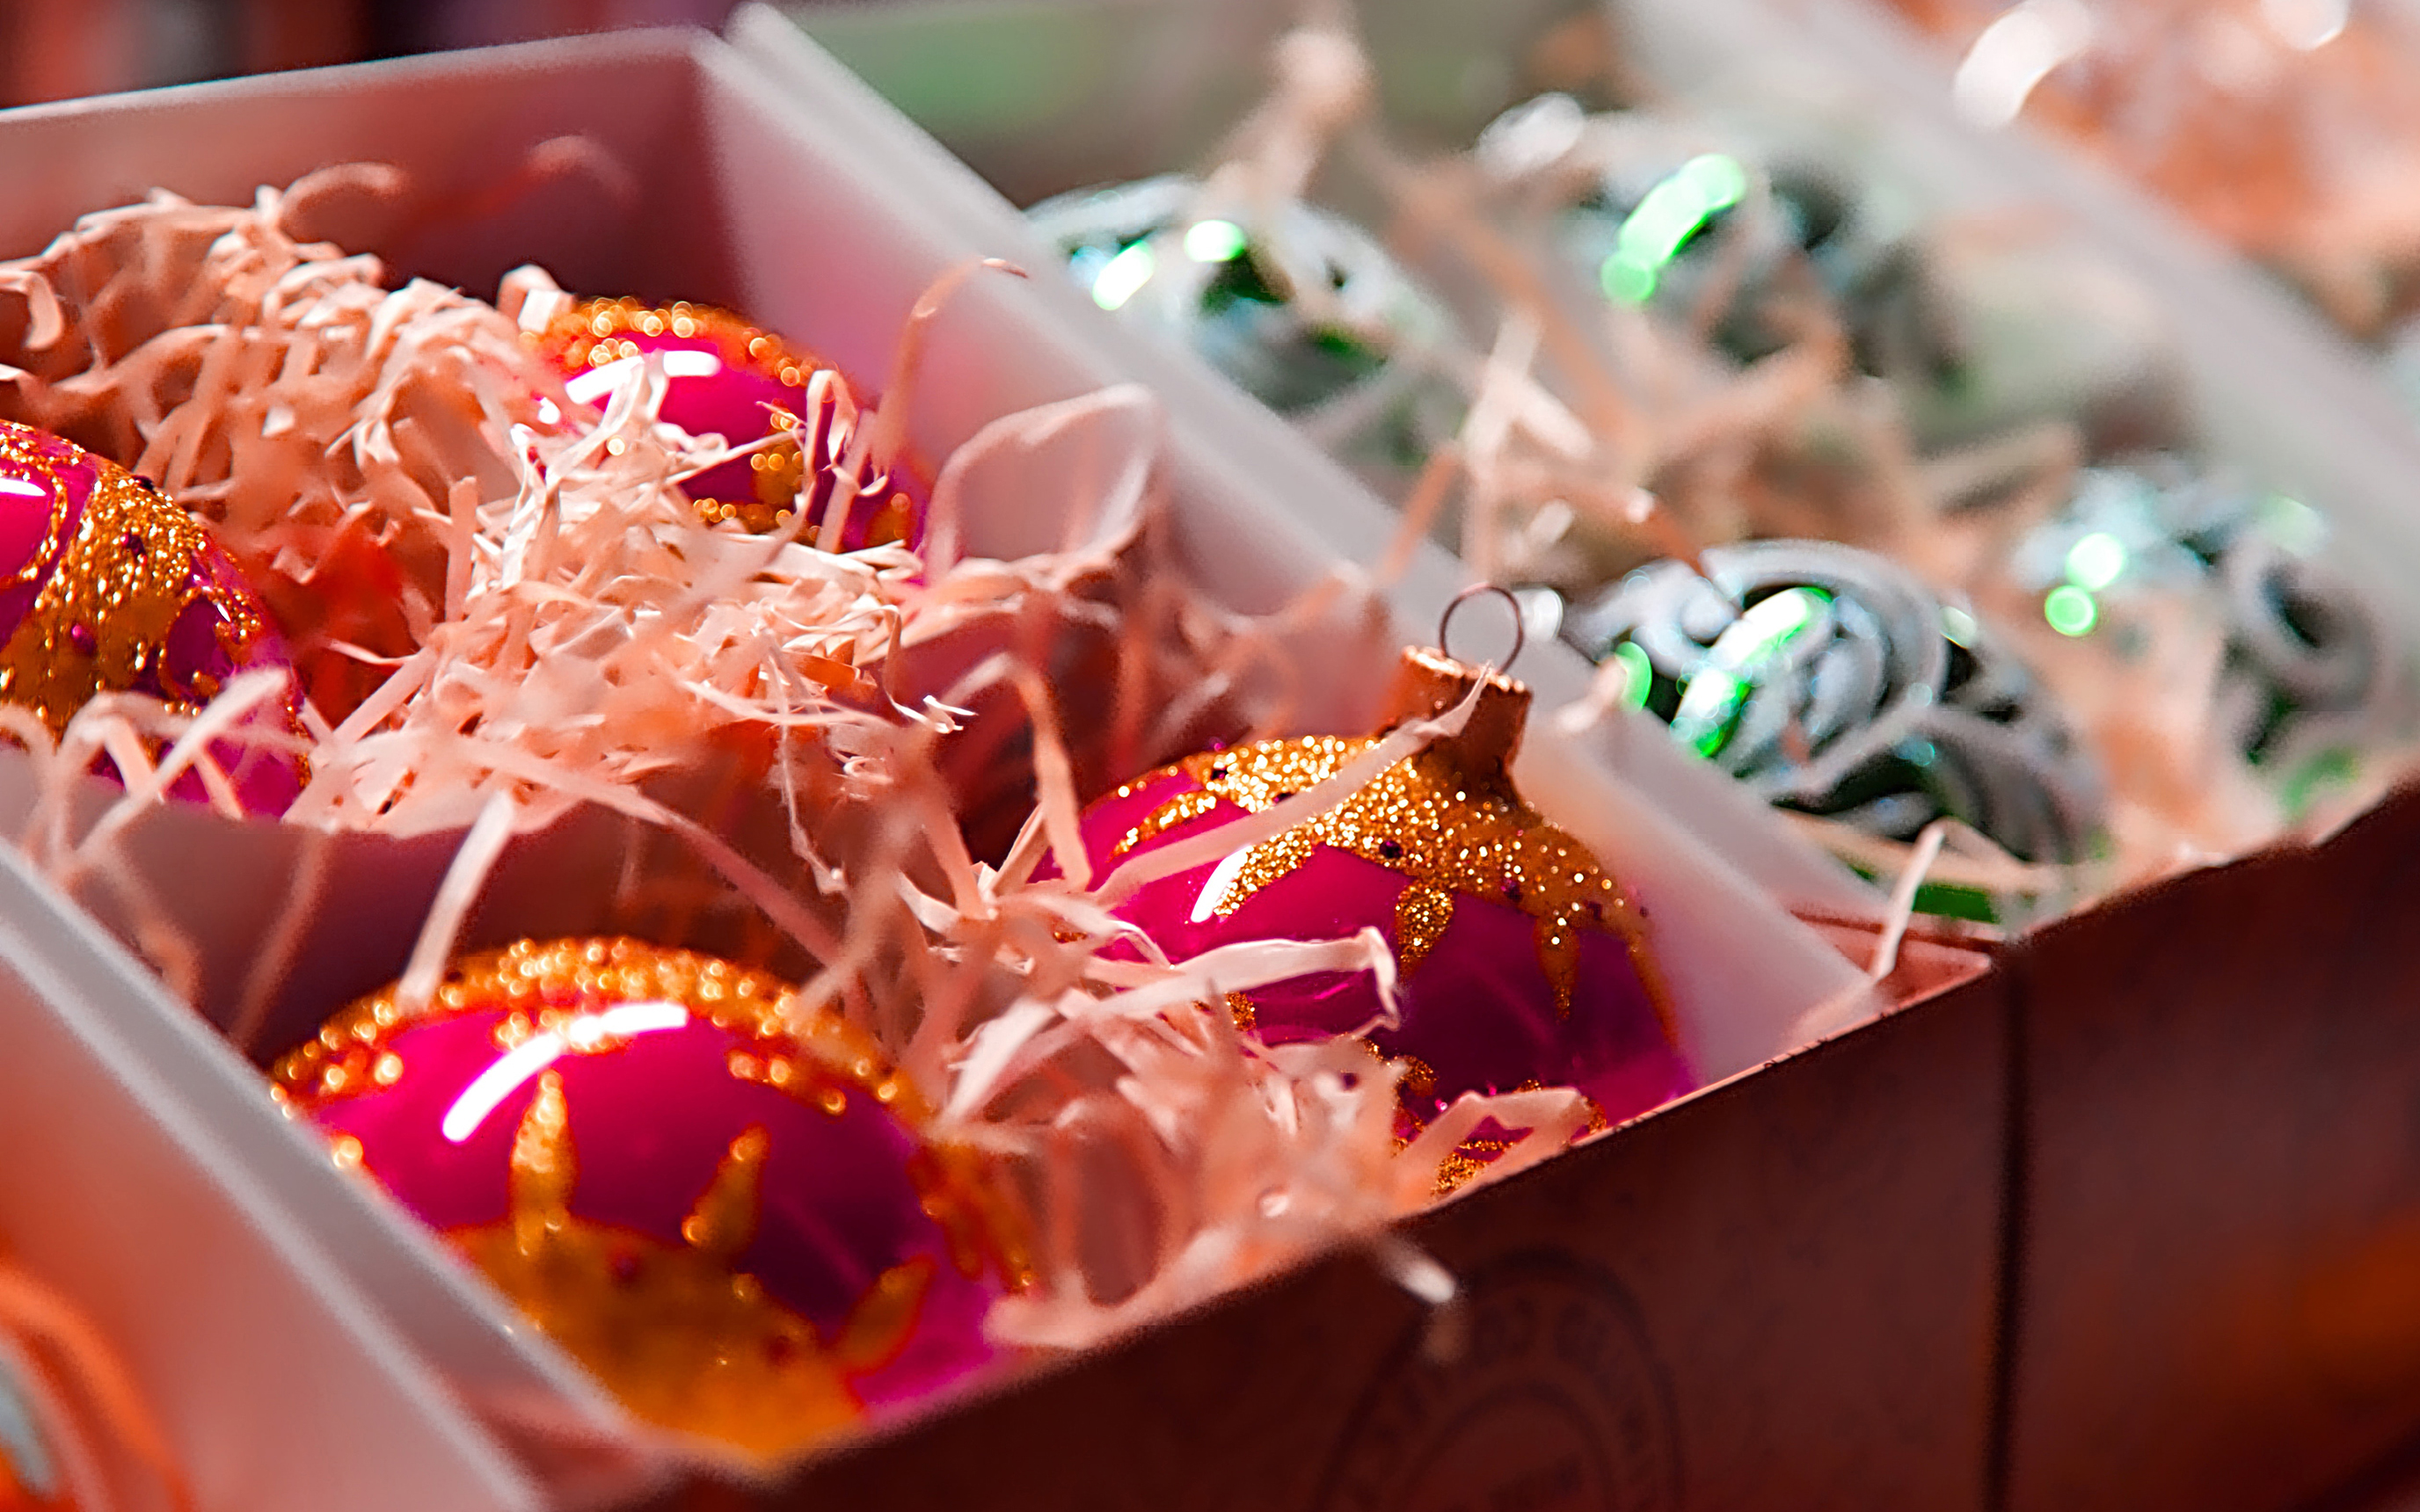 shiny, colorful Christmas ball ornaments stored in compartmented boxes, with paper grass